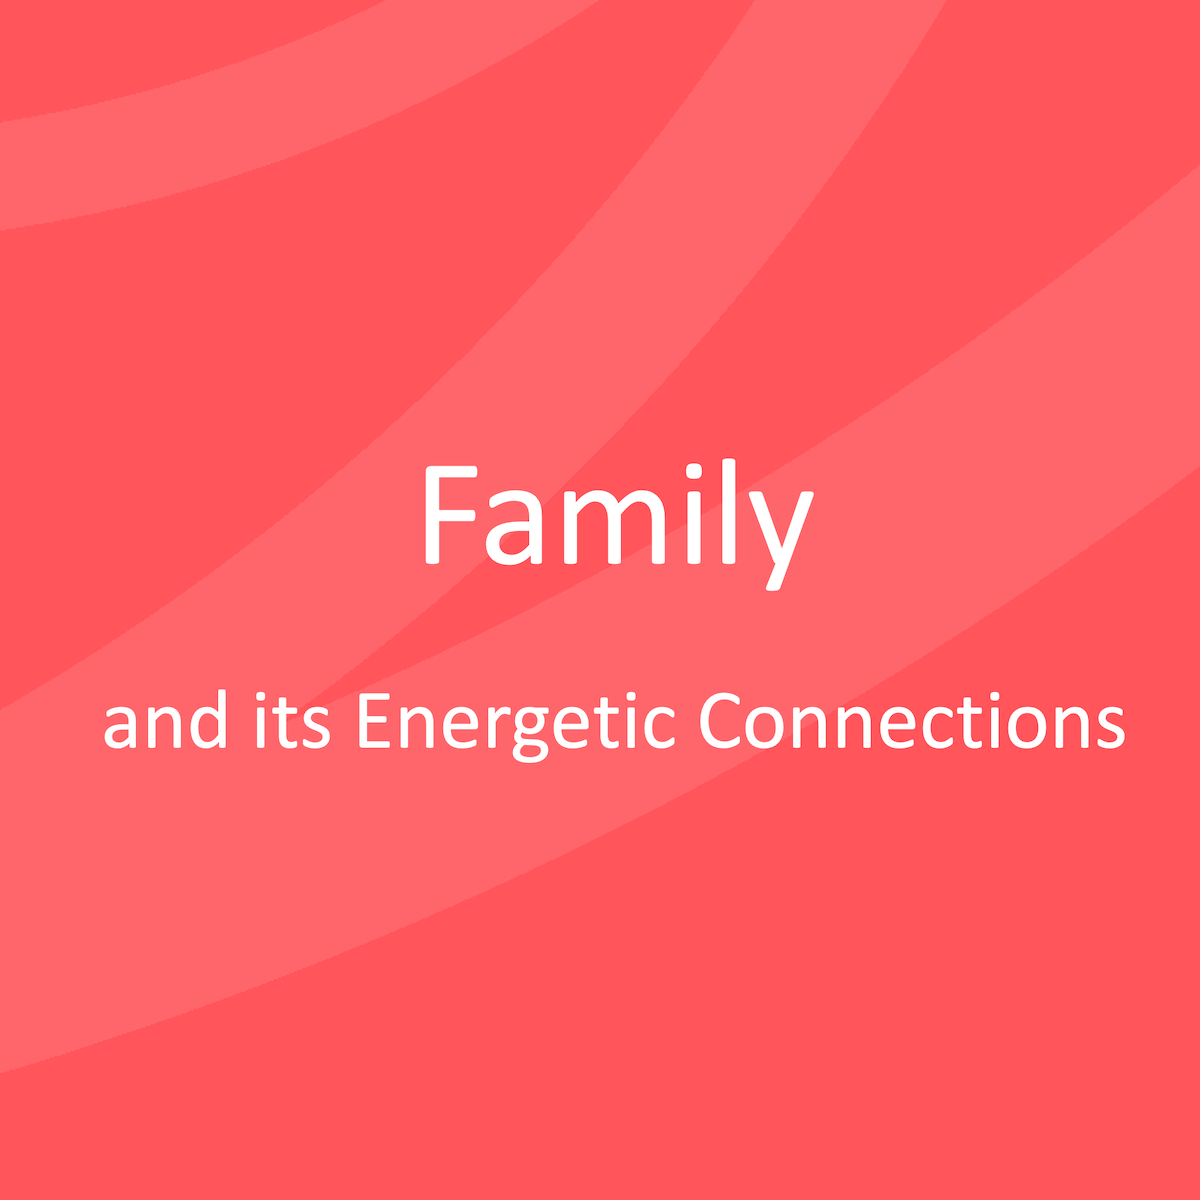 Family and its Energetic Connections